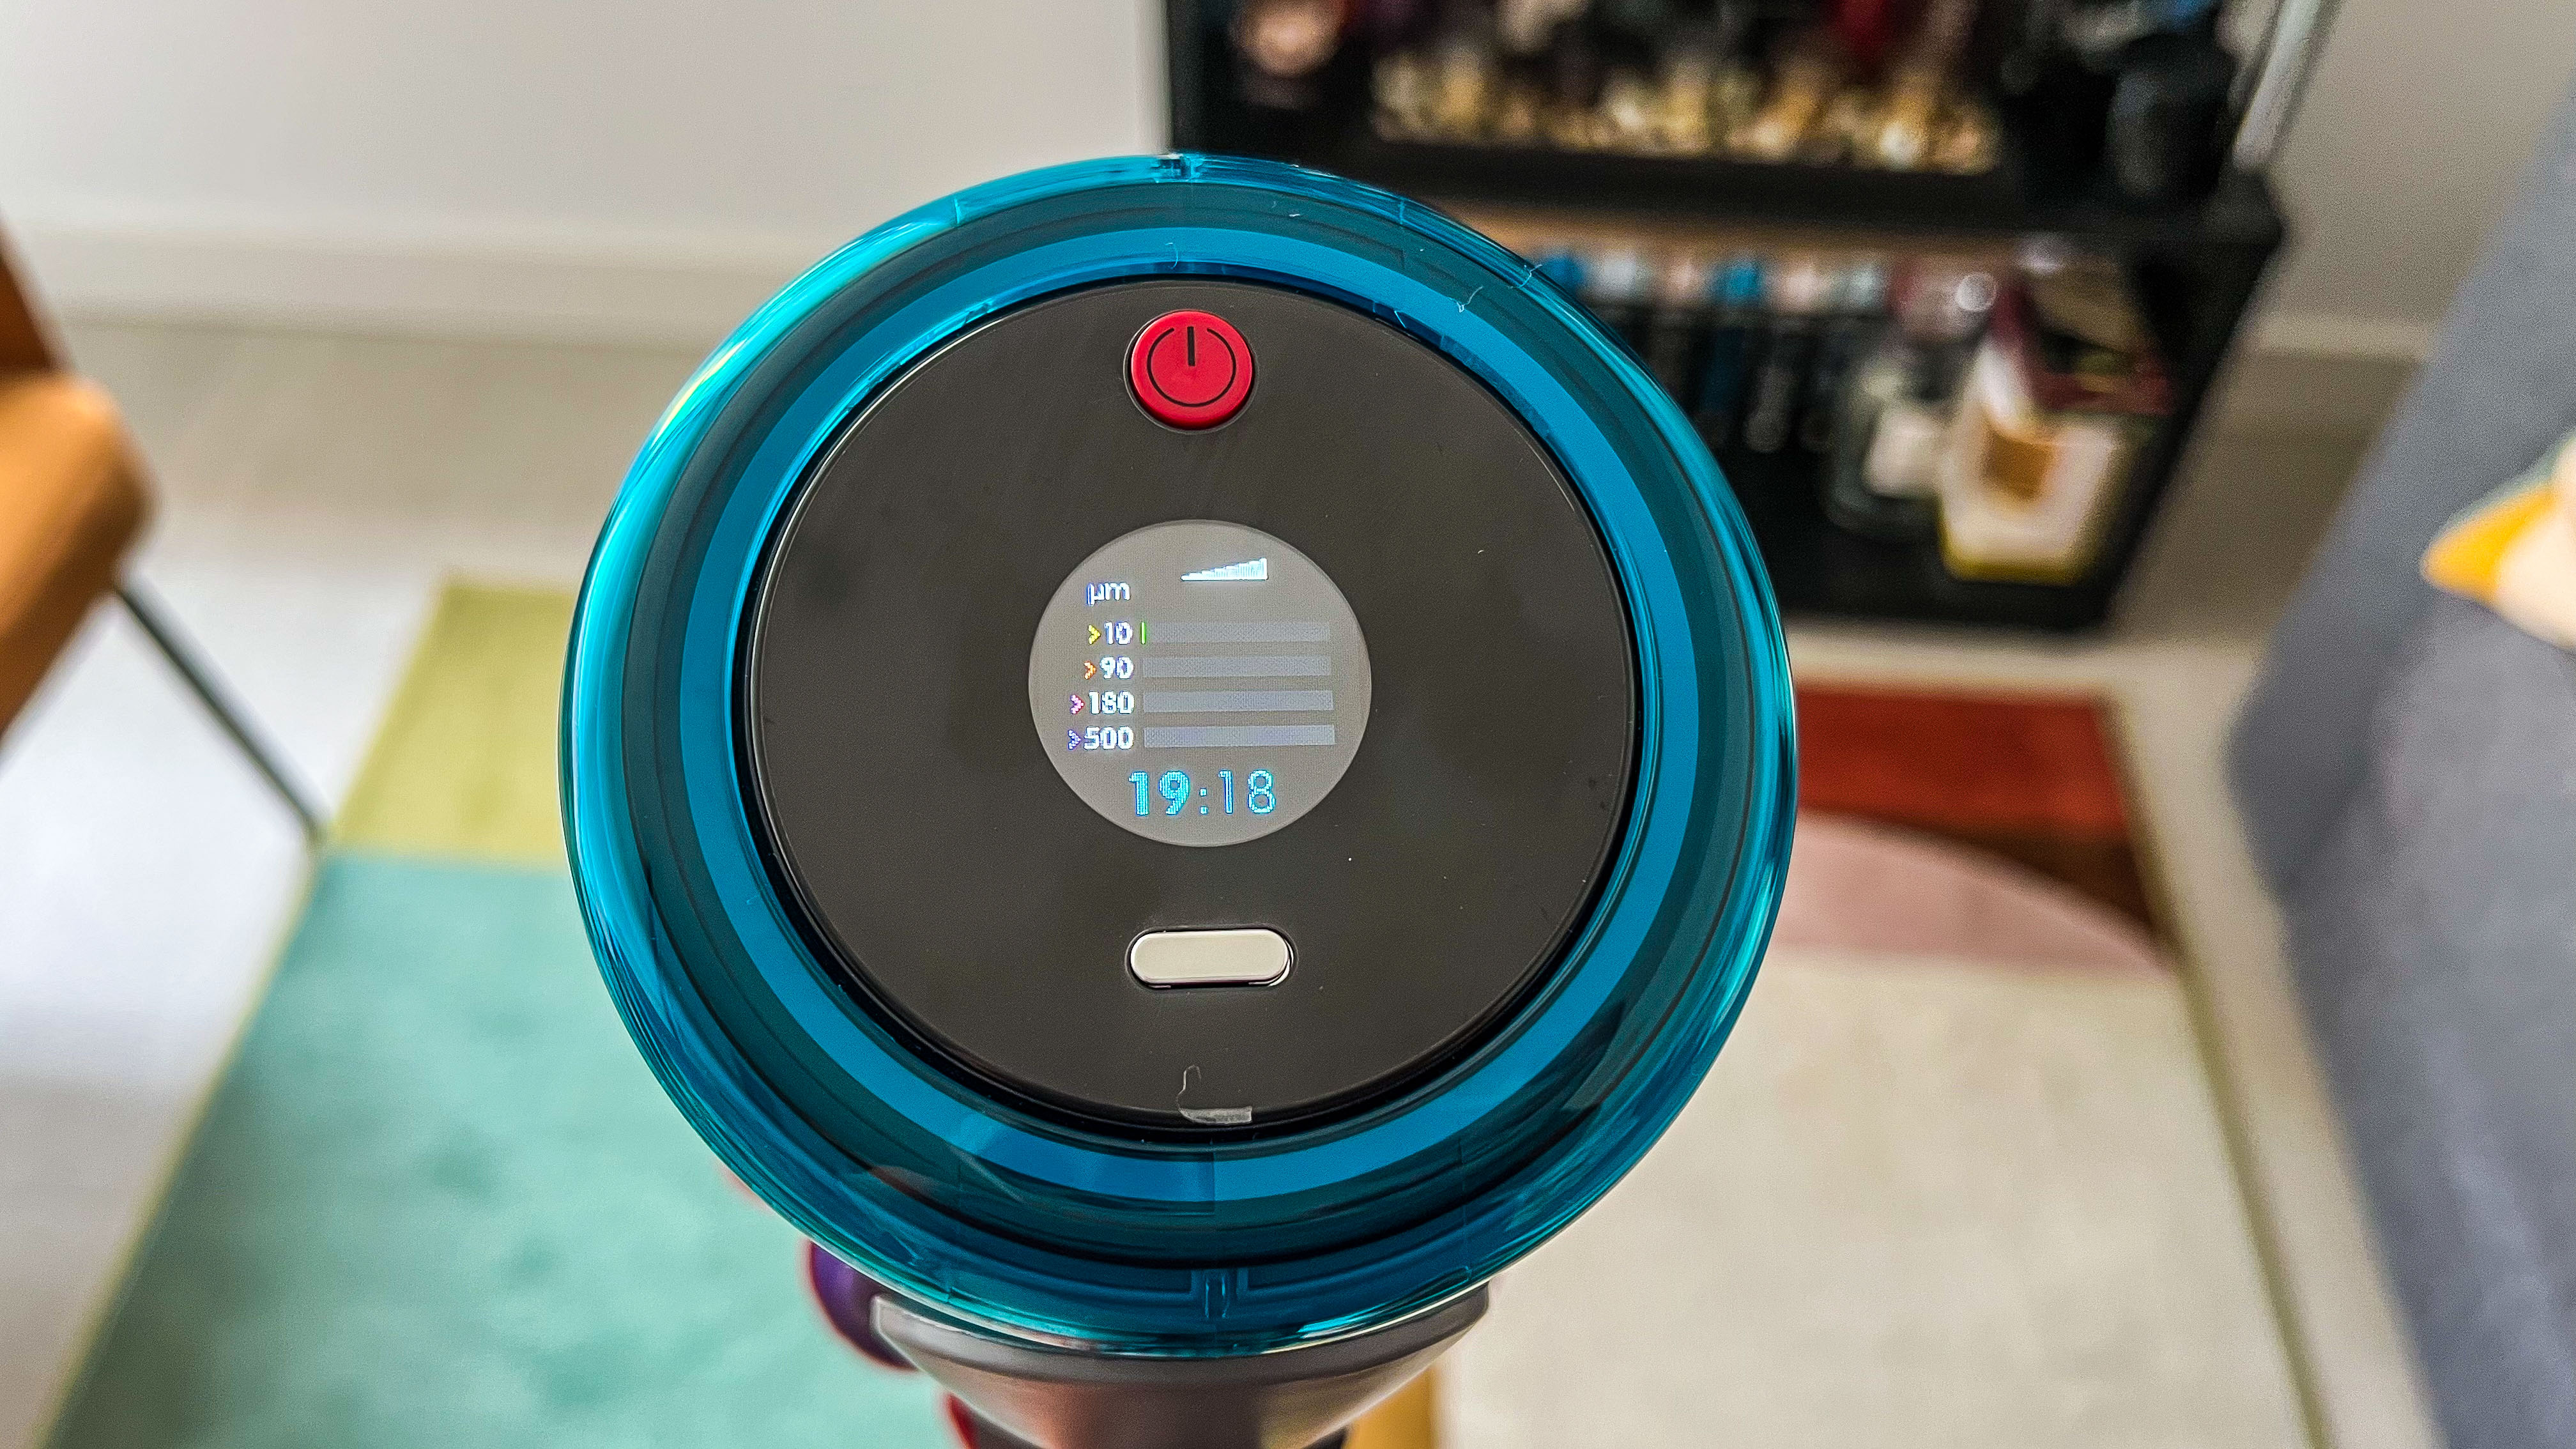 Dyson Gen5 Detect displays dirt data horizontally on the round LCD screen